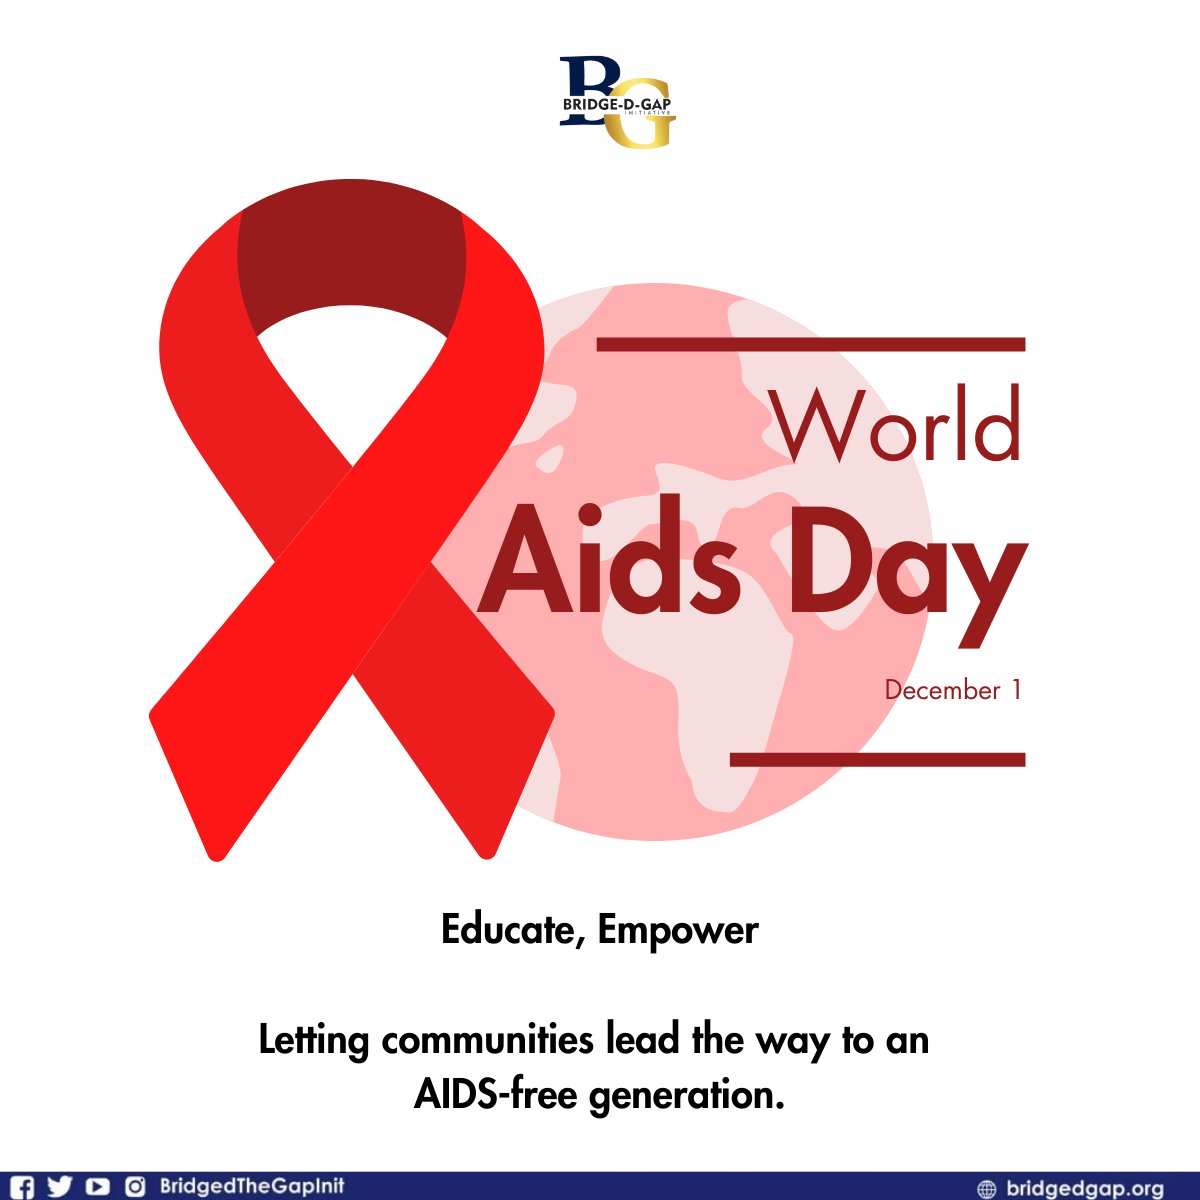 On World AIDS Day, we unite to educate and empower, recognizing that by letting communities lead the way, we can pave the path towards an AIDS-free generation. 

#worldaidsday #sexedmatters #empowerment #educatethecommunity